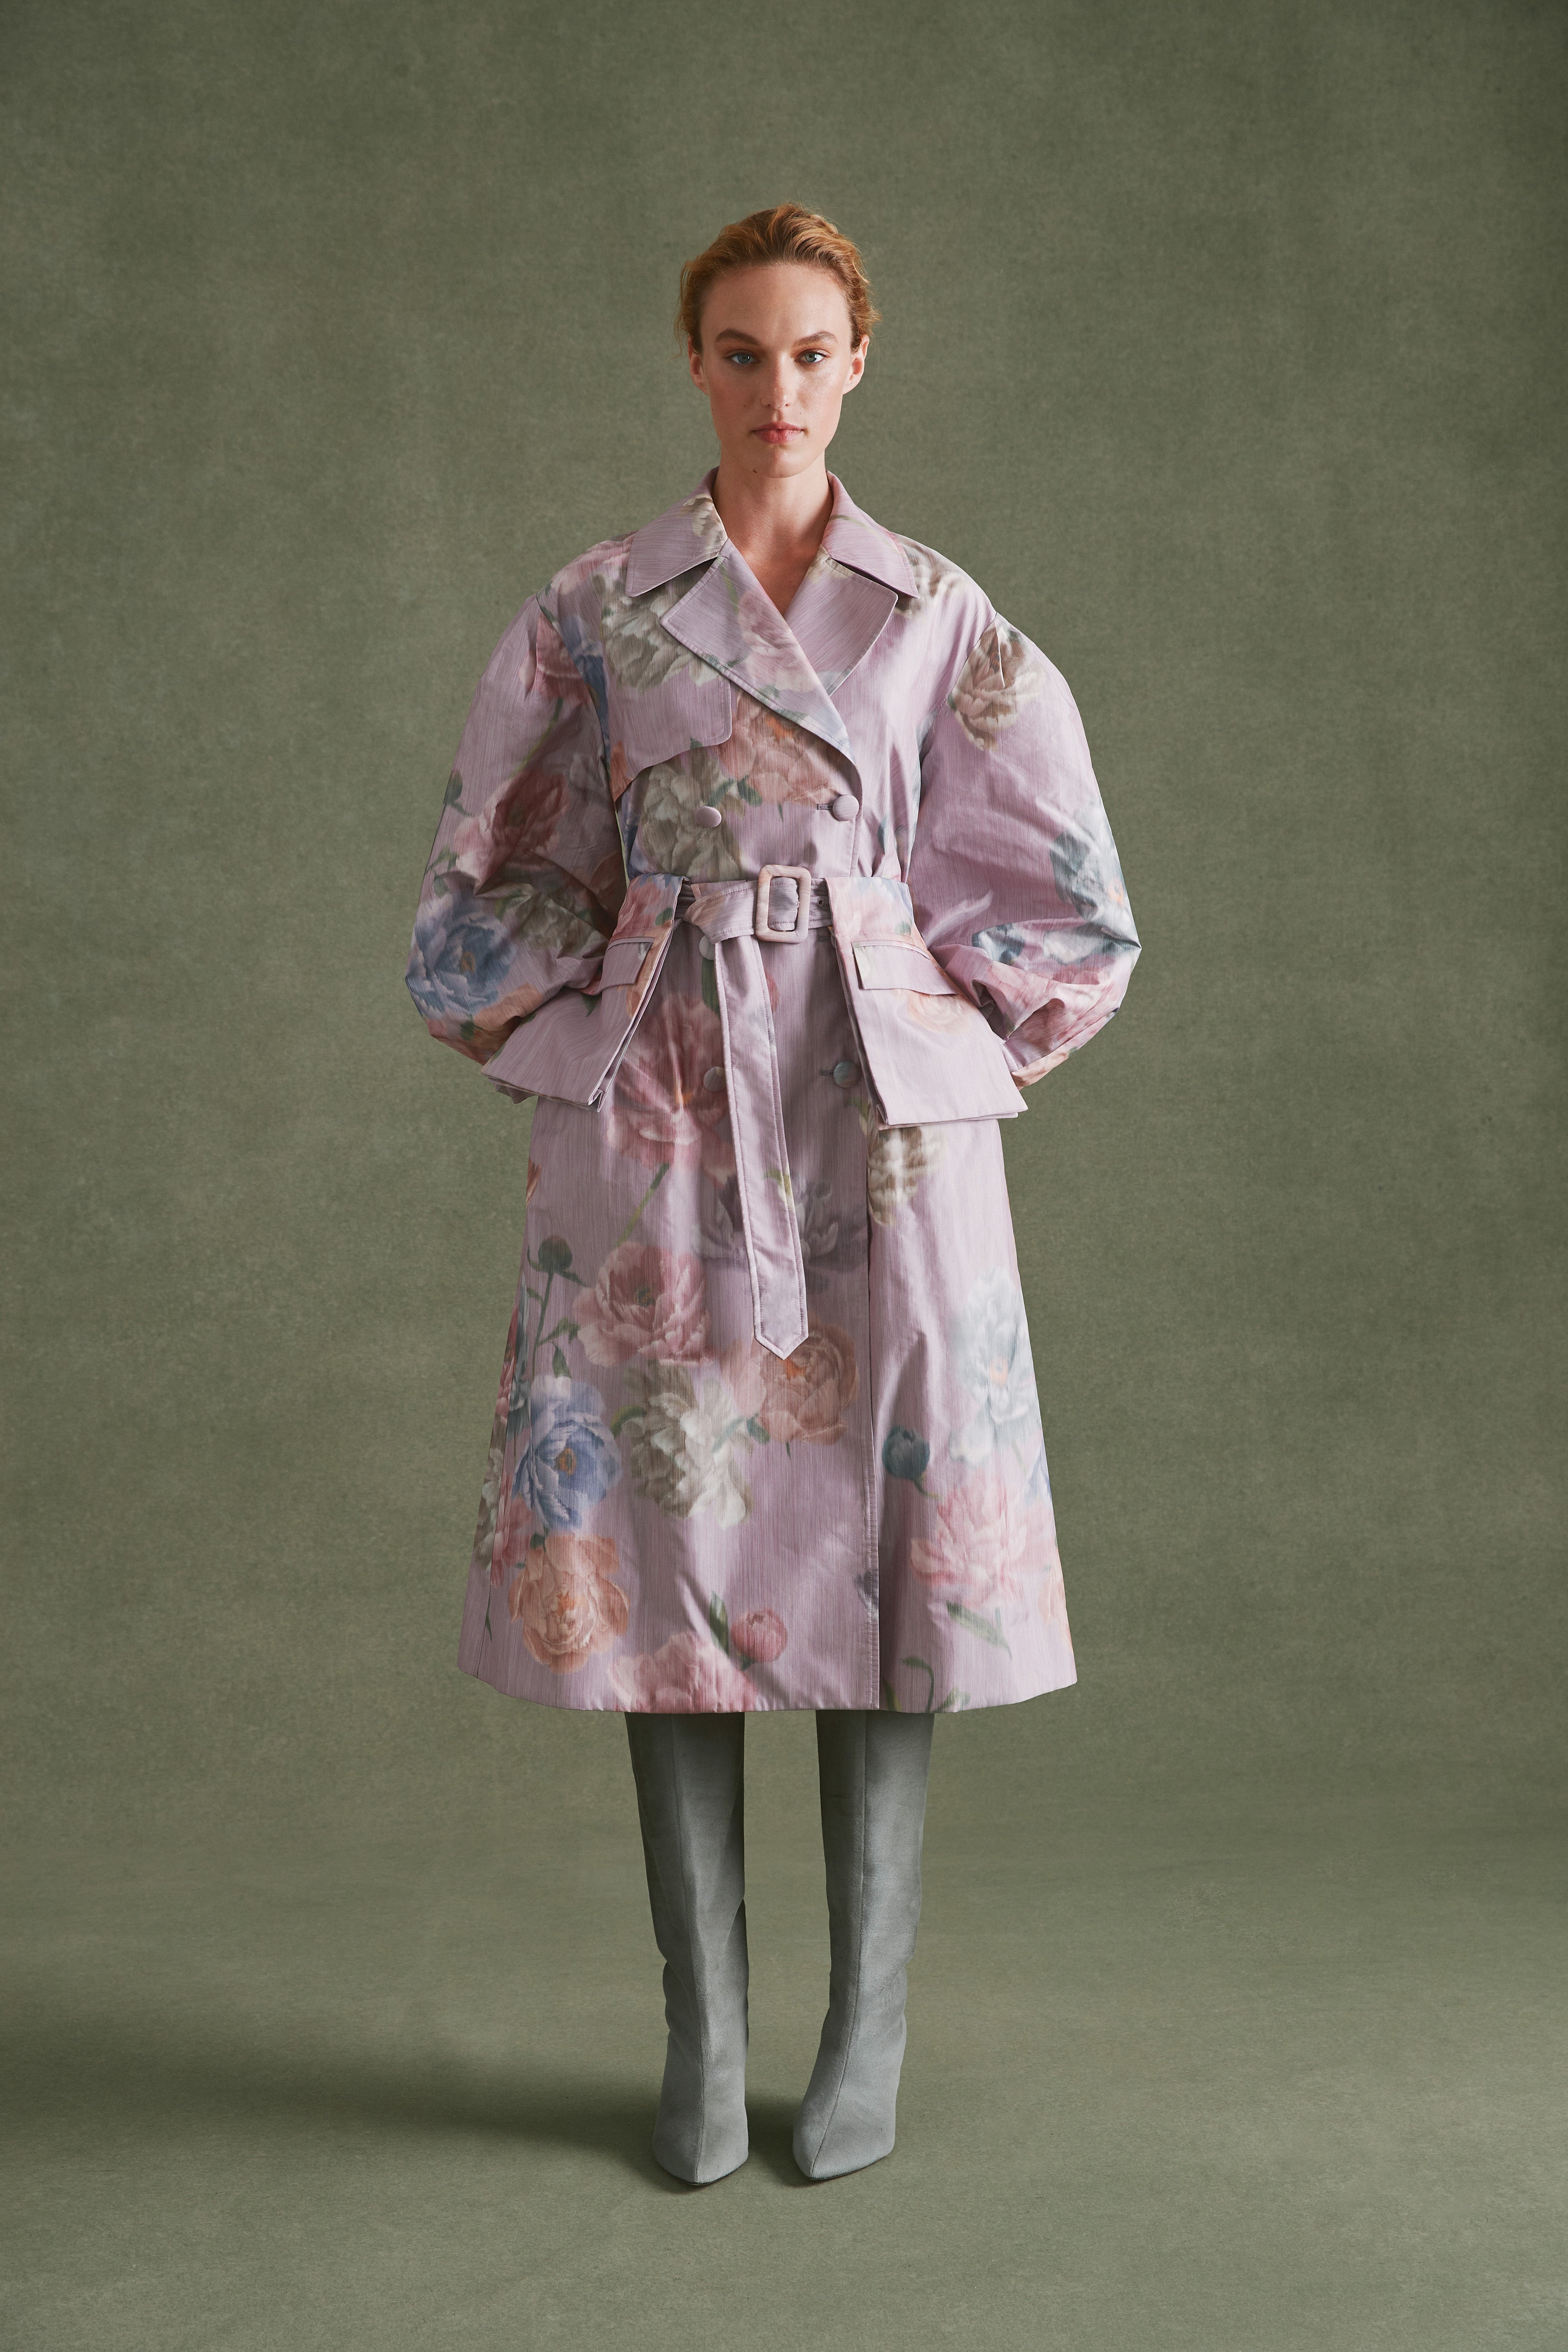 Alexandra Pijut Riding Trench in Lilac Floral Brocade. Oversized trench coat, demi couture. Evening wear.